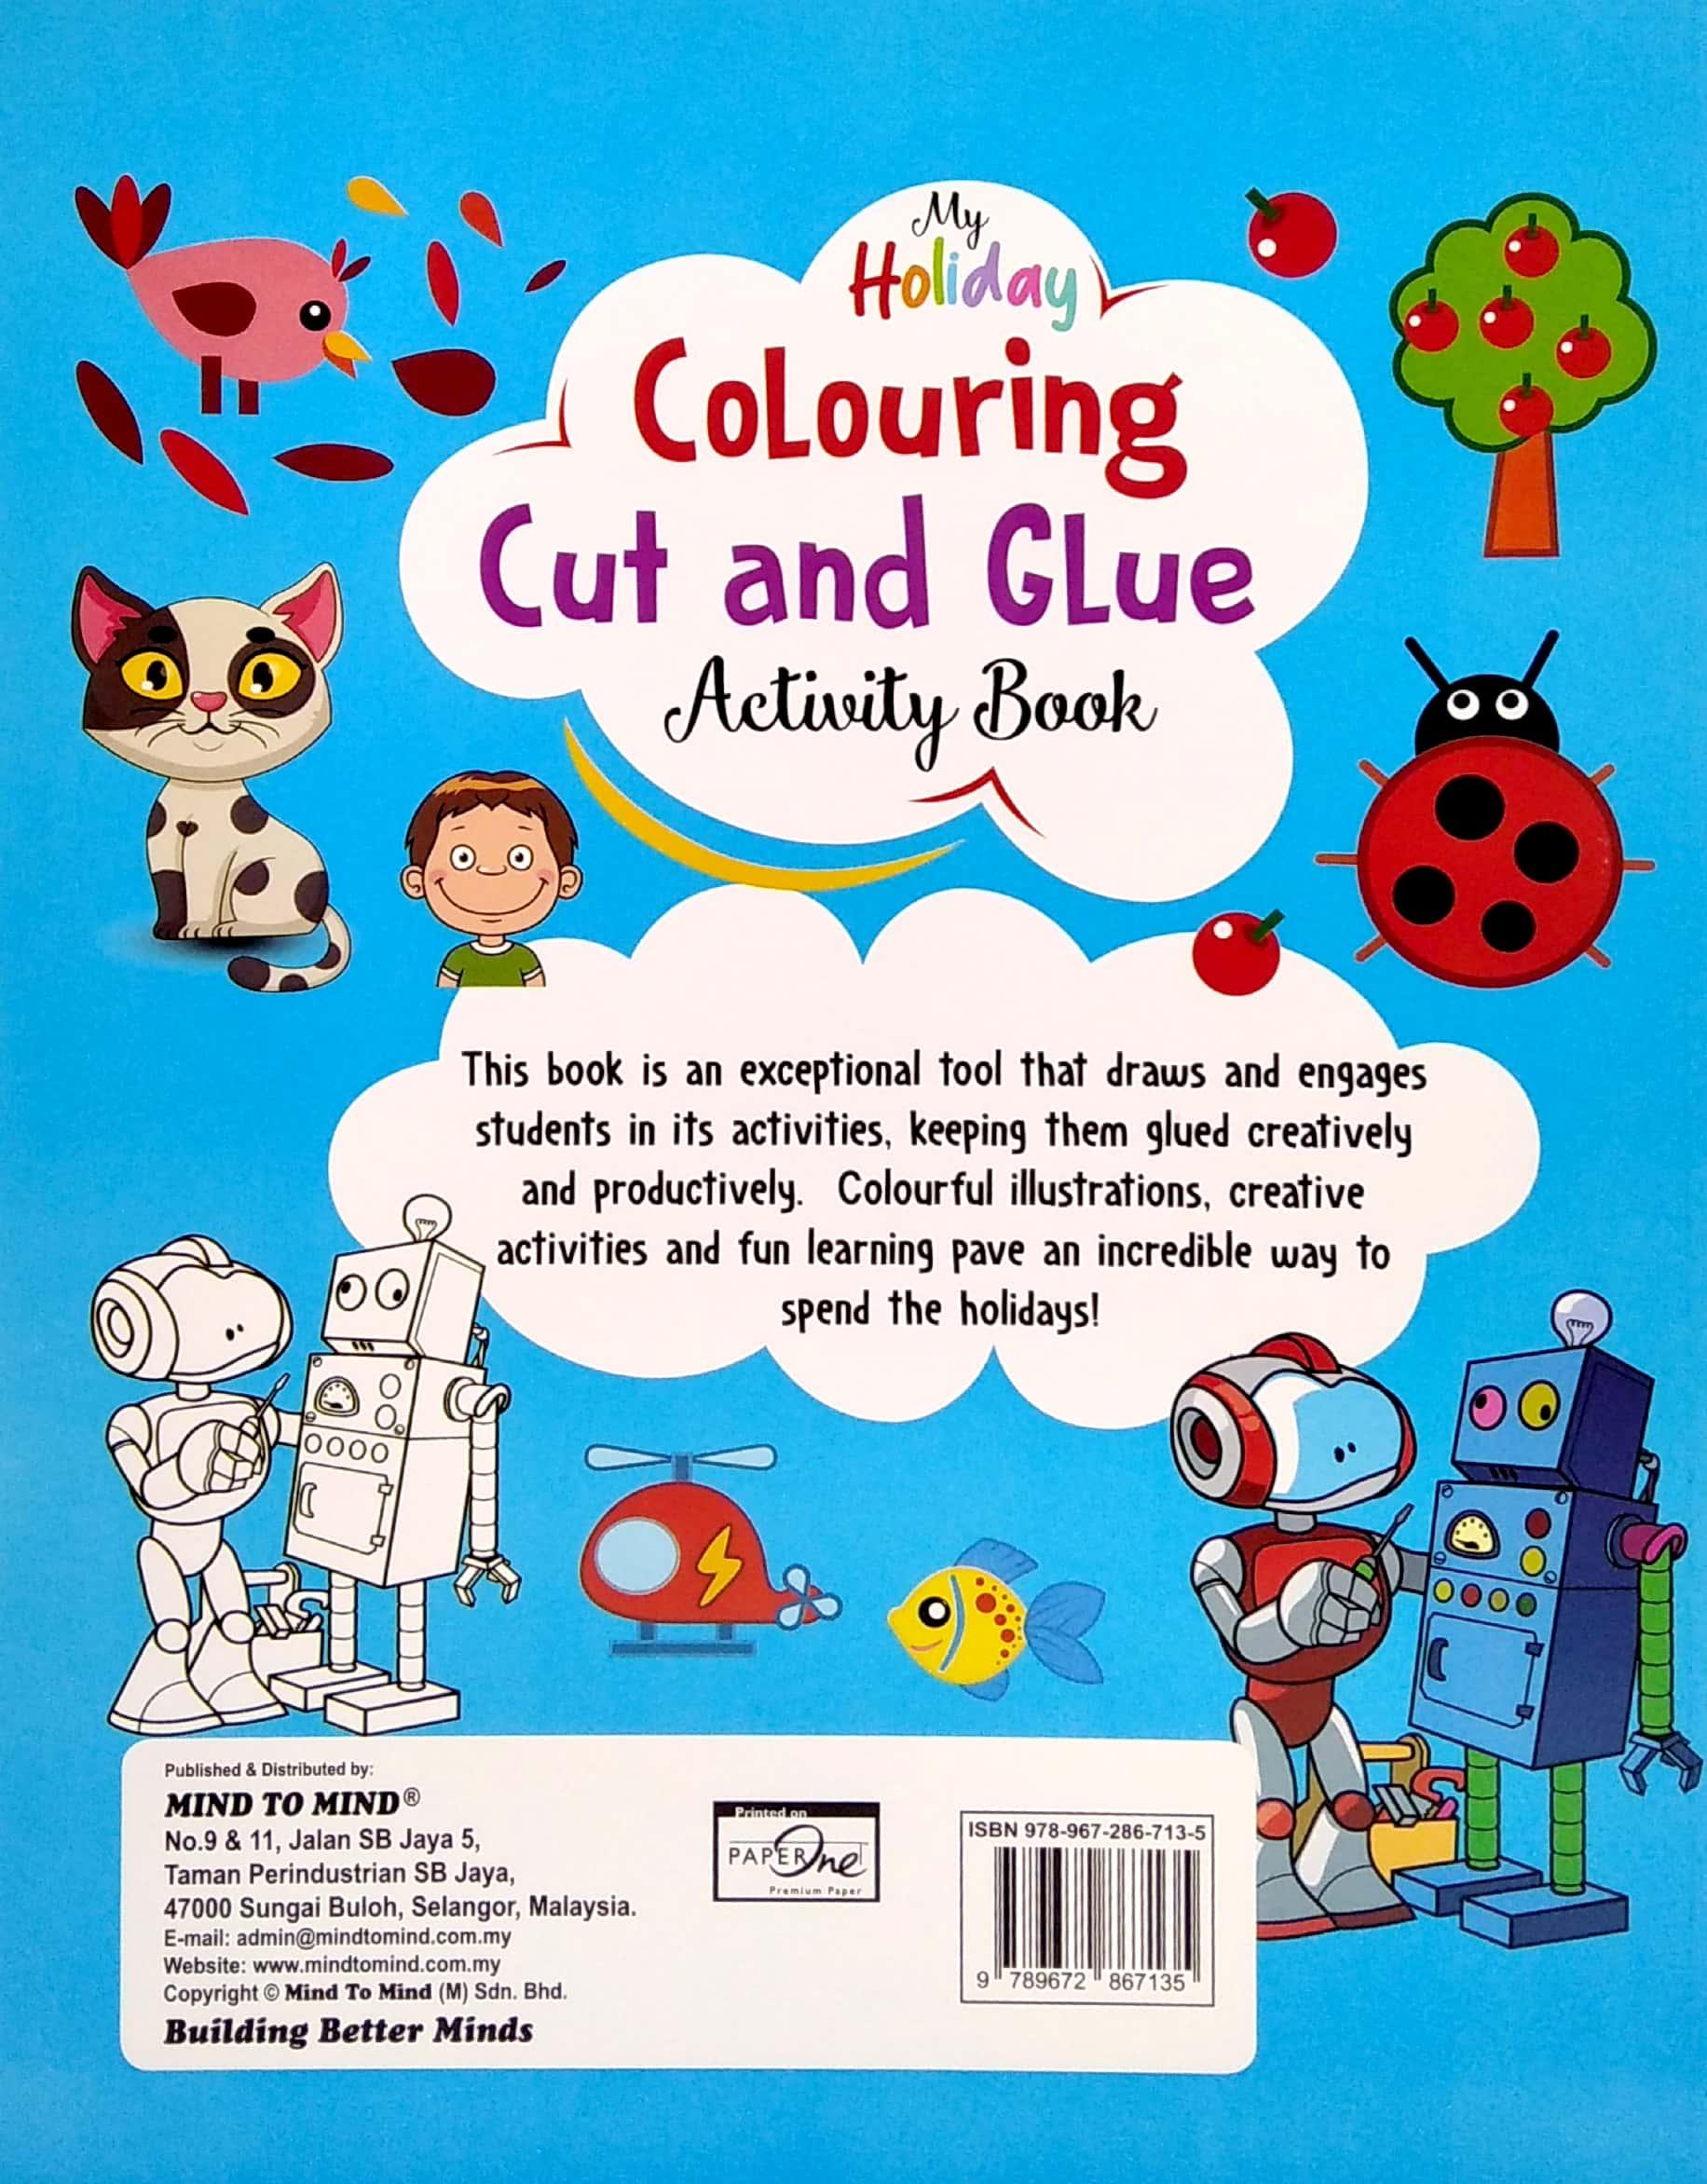 My Holiday Colouring Cut And Glue Activity Book